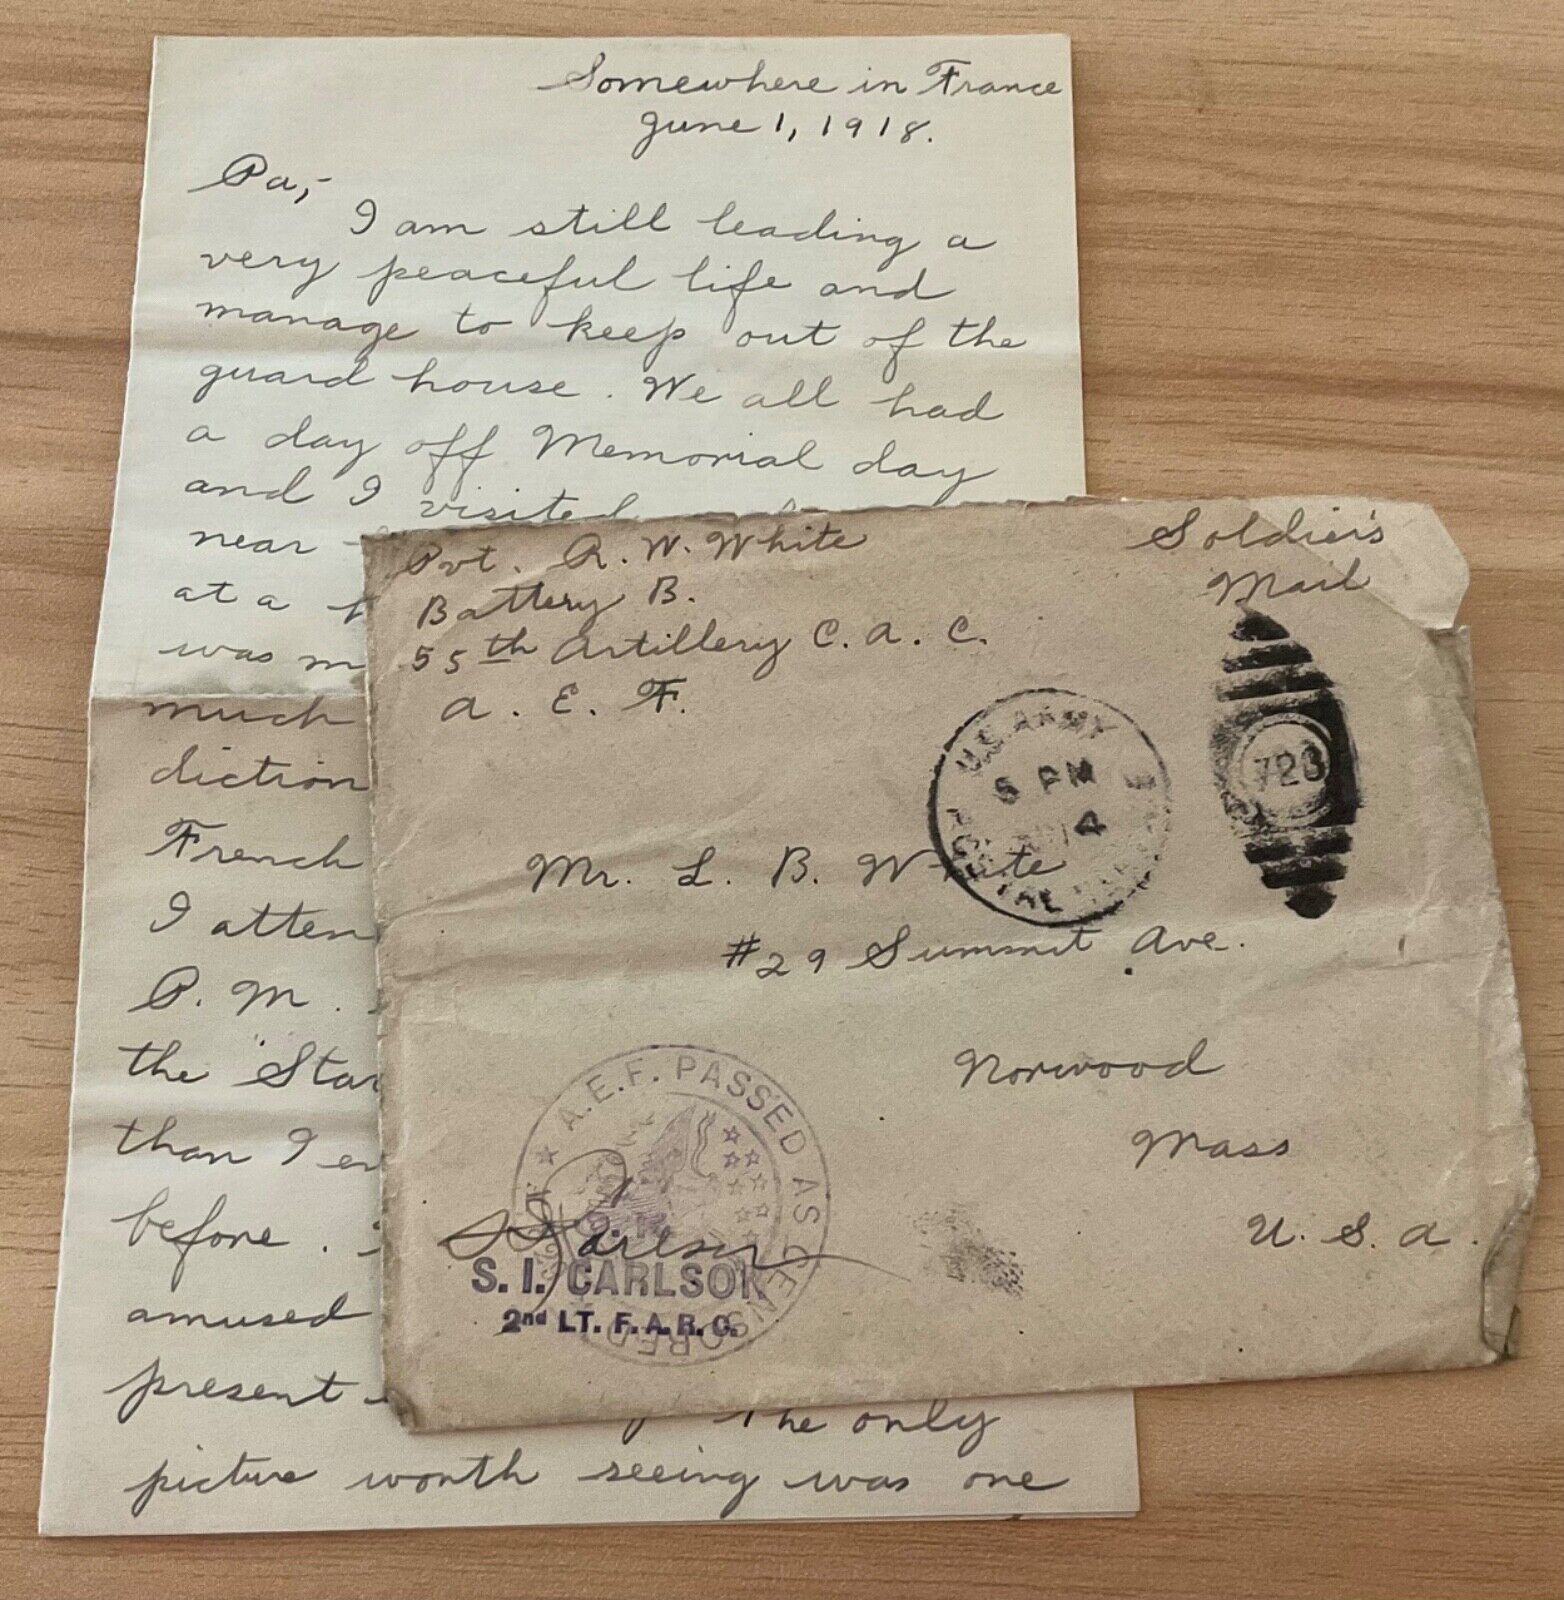 WWI AEF letter Batt B 55th Art. C.A.C, paid in francs, keeping out guard house.